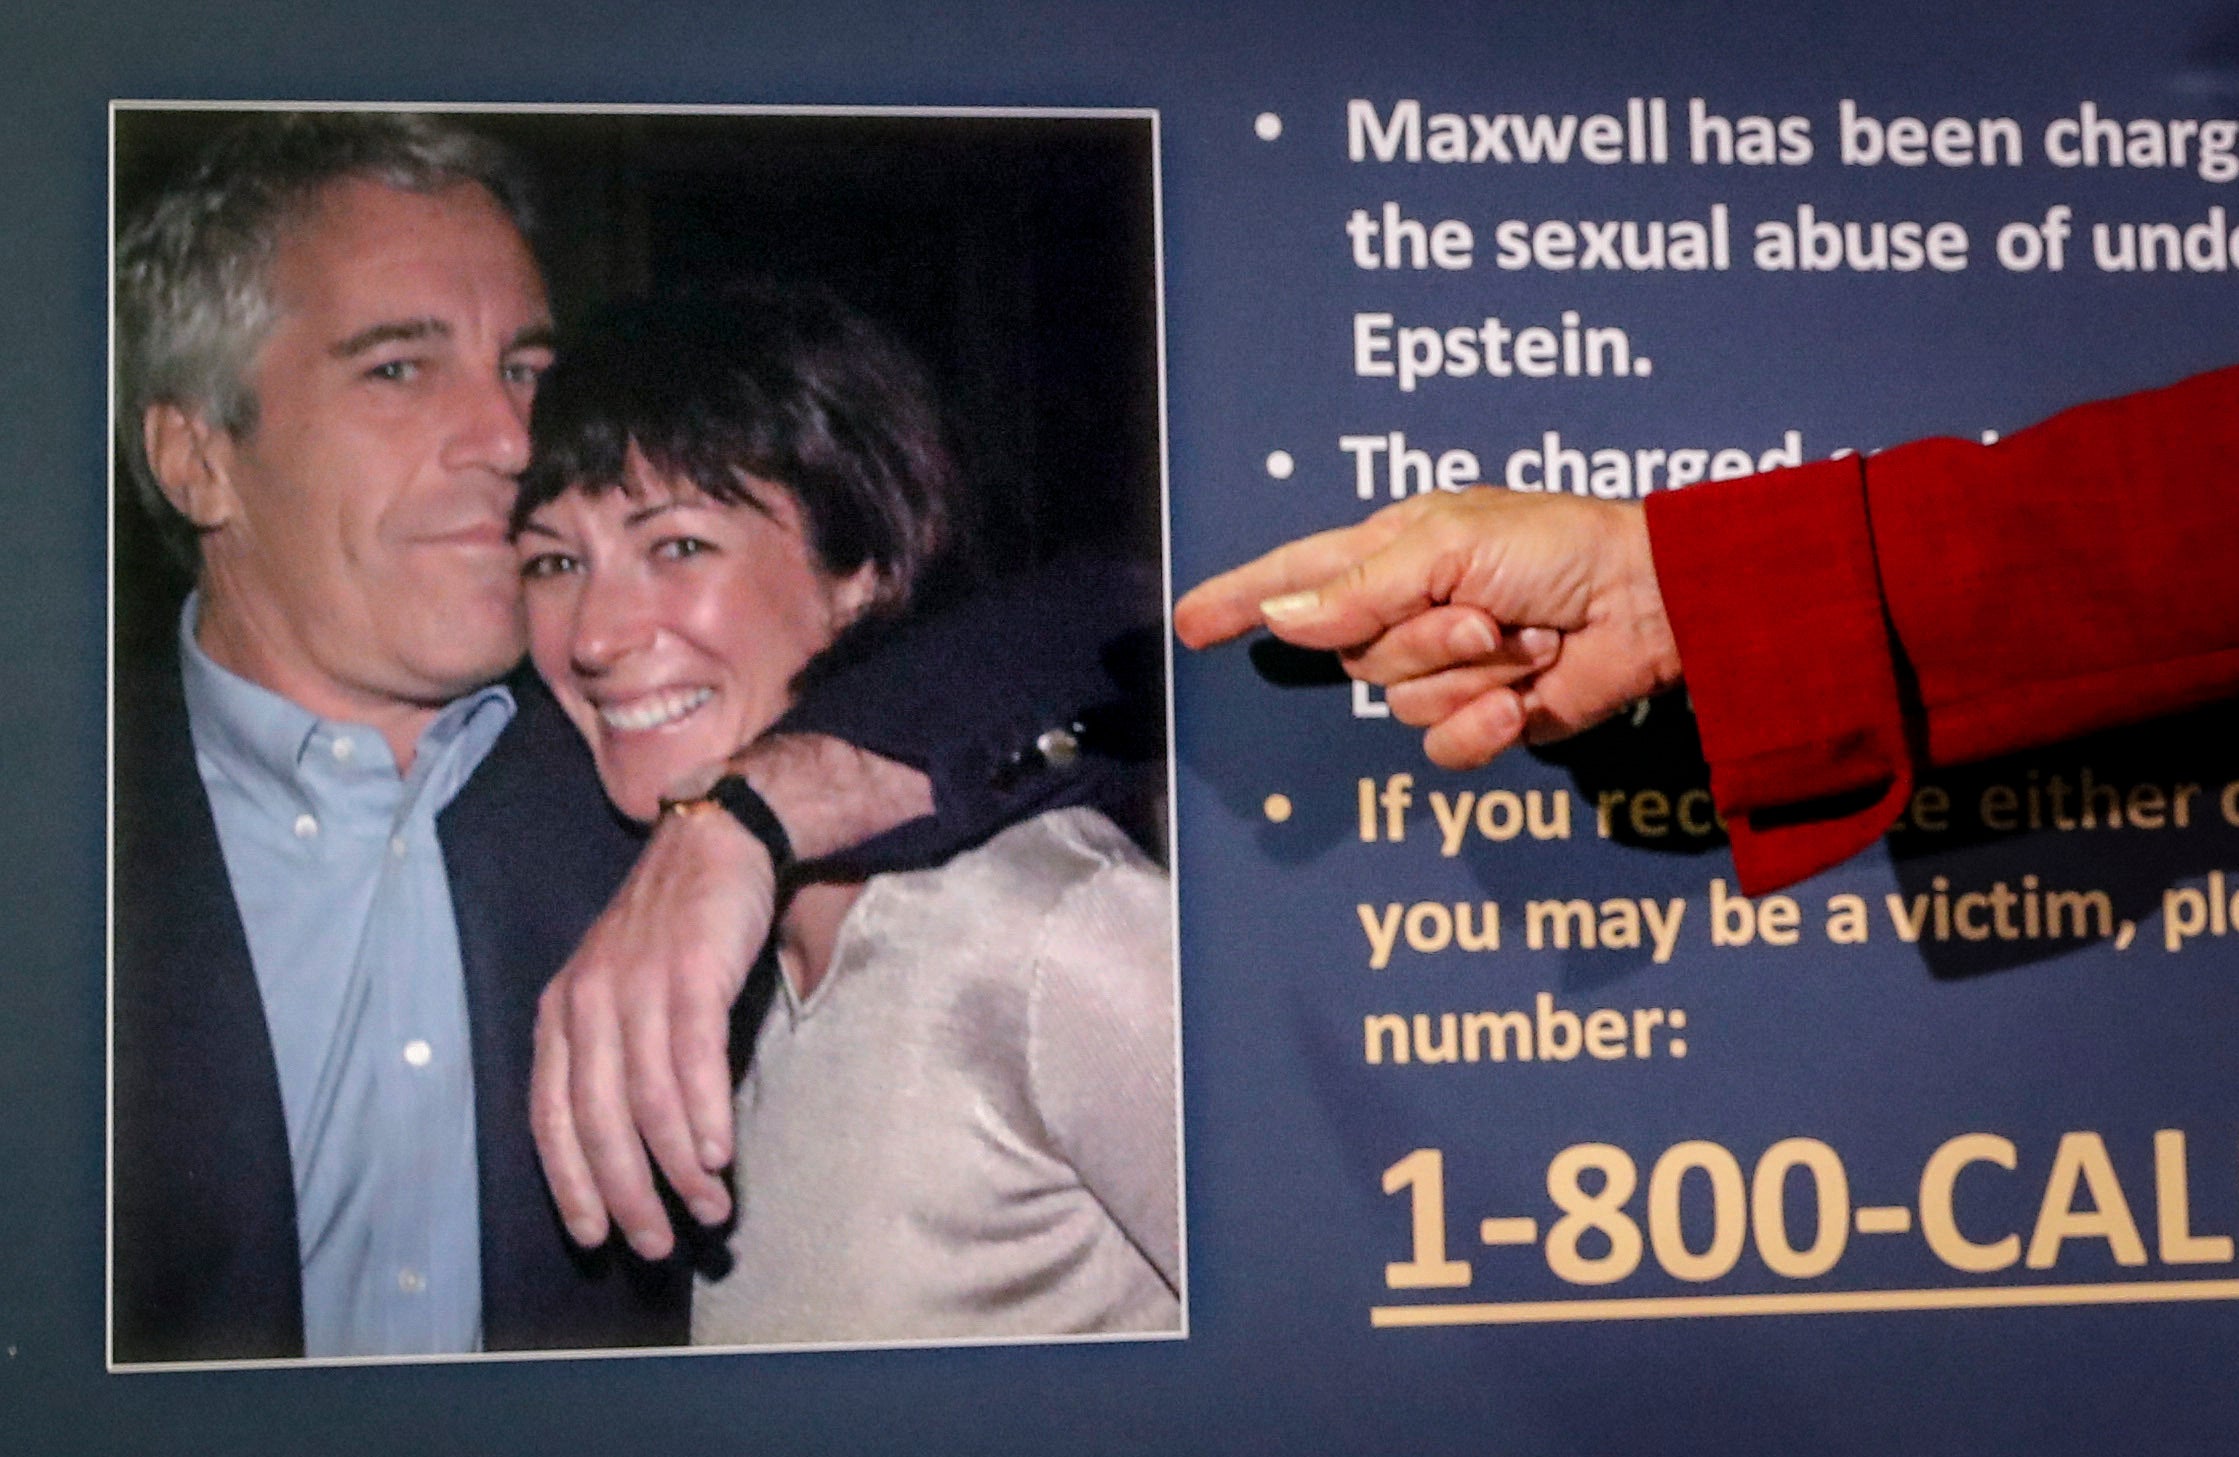 Epstein S Ex Girlfriend Seeks Dismissal Of Charges She Faces Lawyers